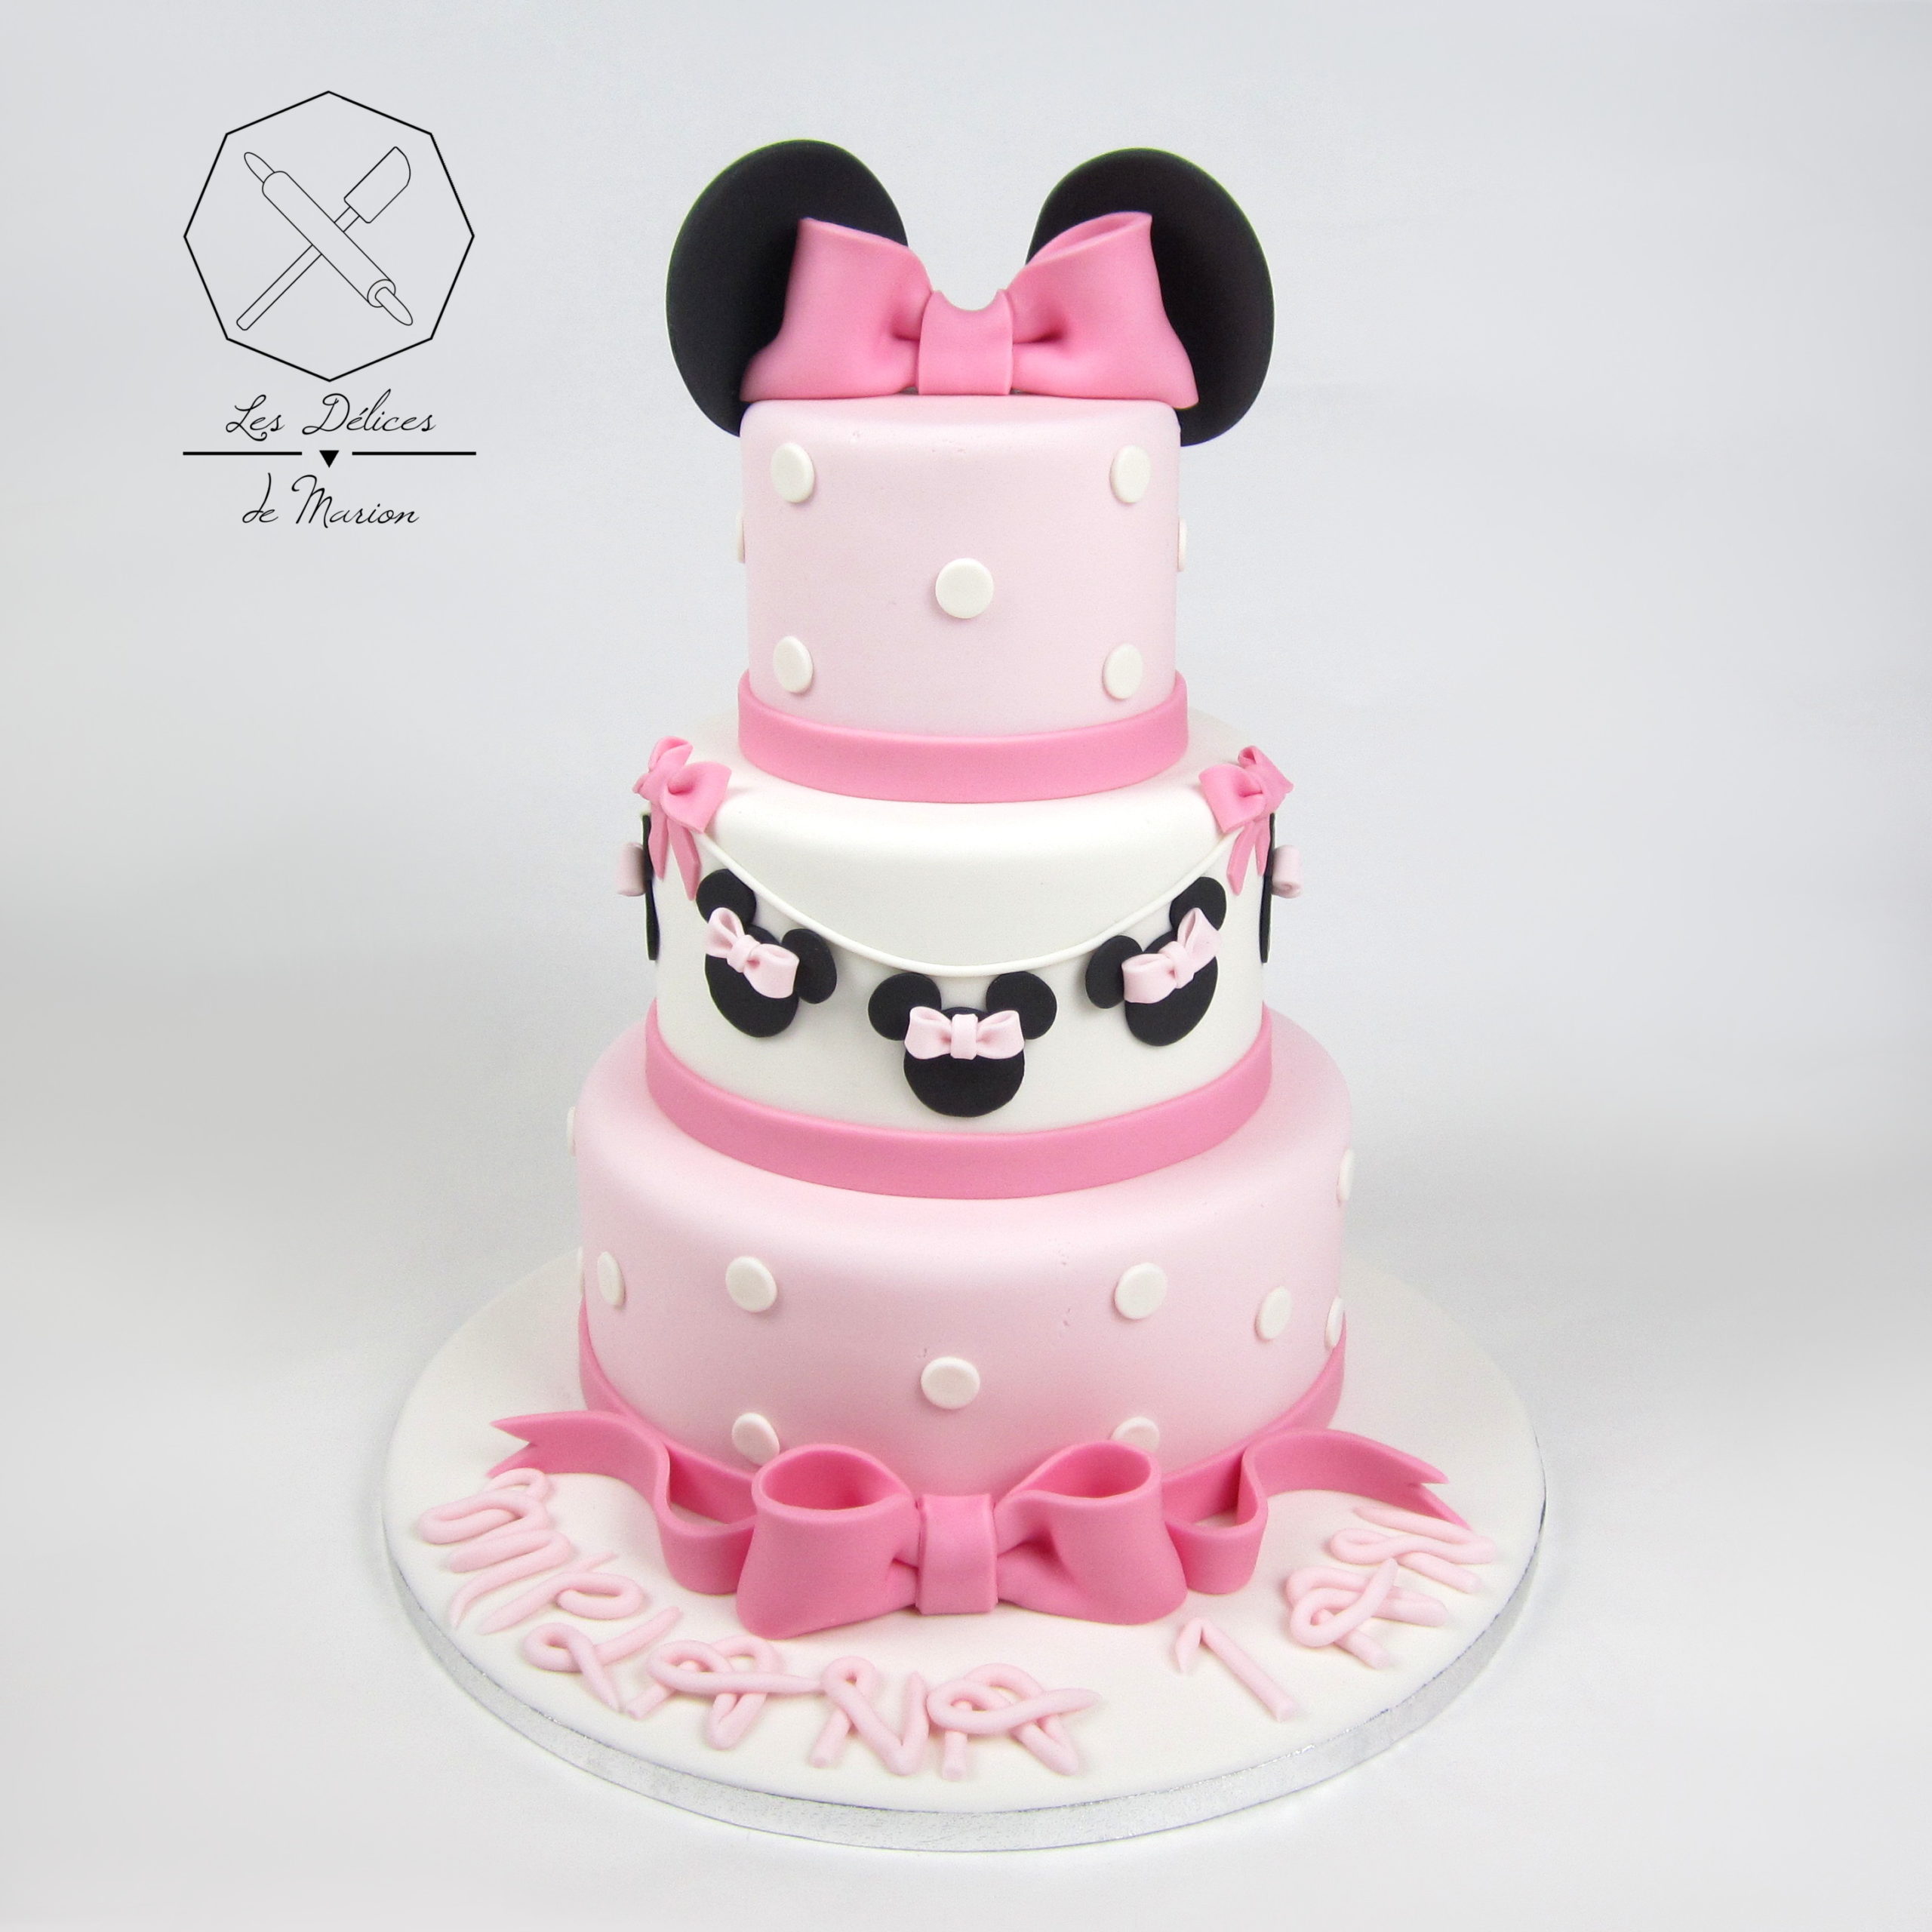 gateau_minnie_baby_cake-design_delices-marion